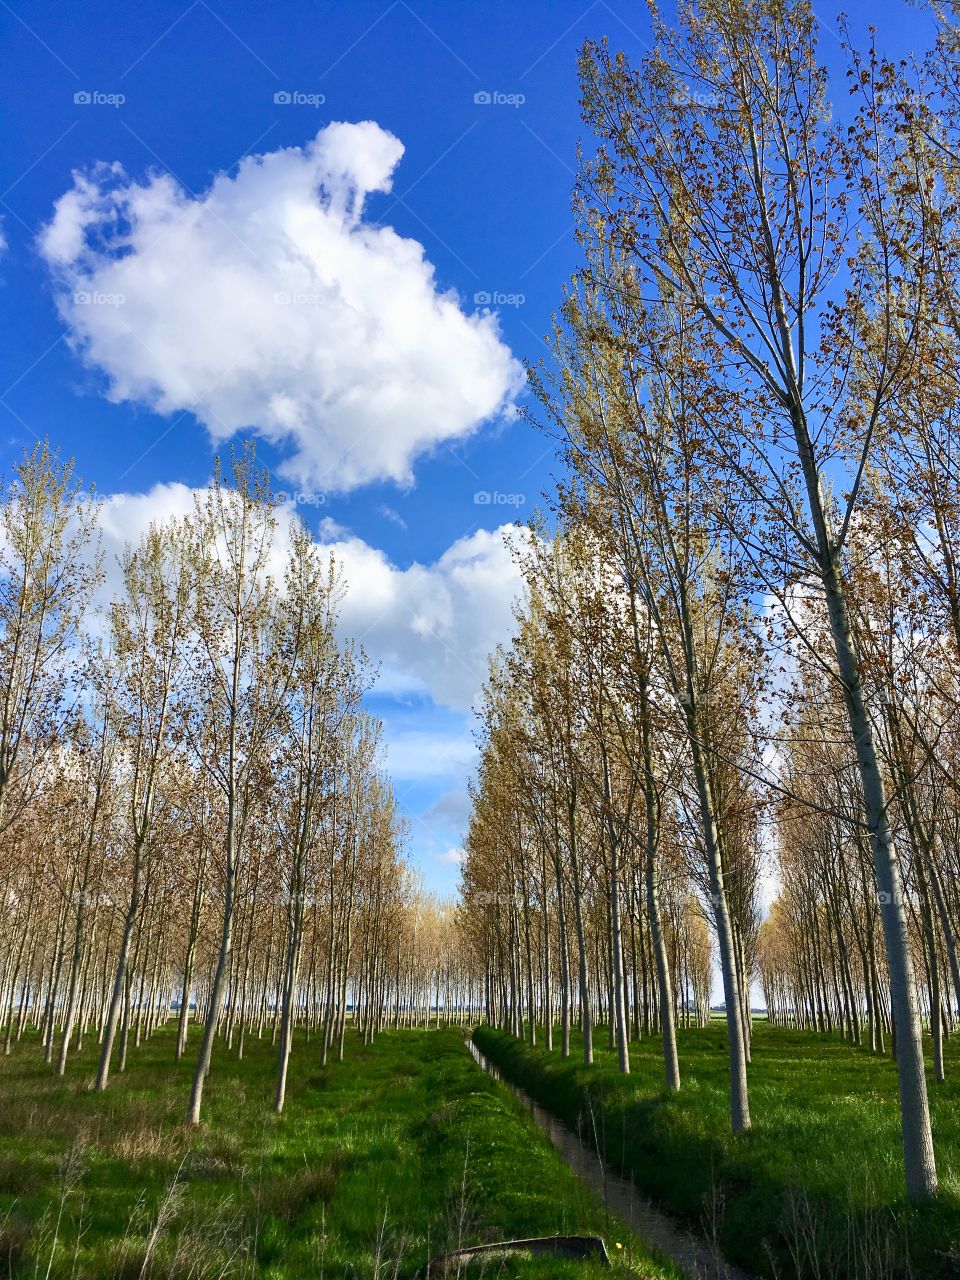 bucolic image of a poplar grove in spring in the Piedmont countryside